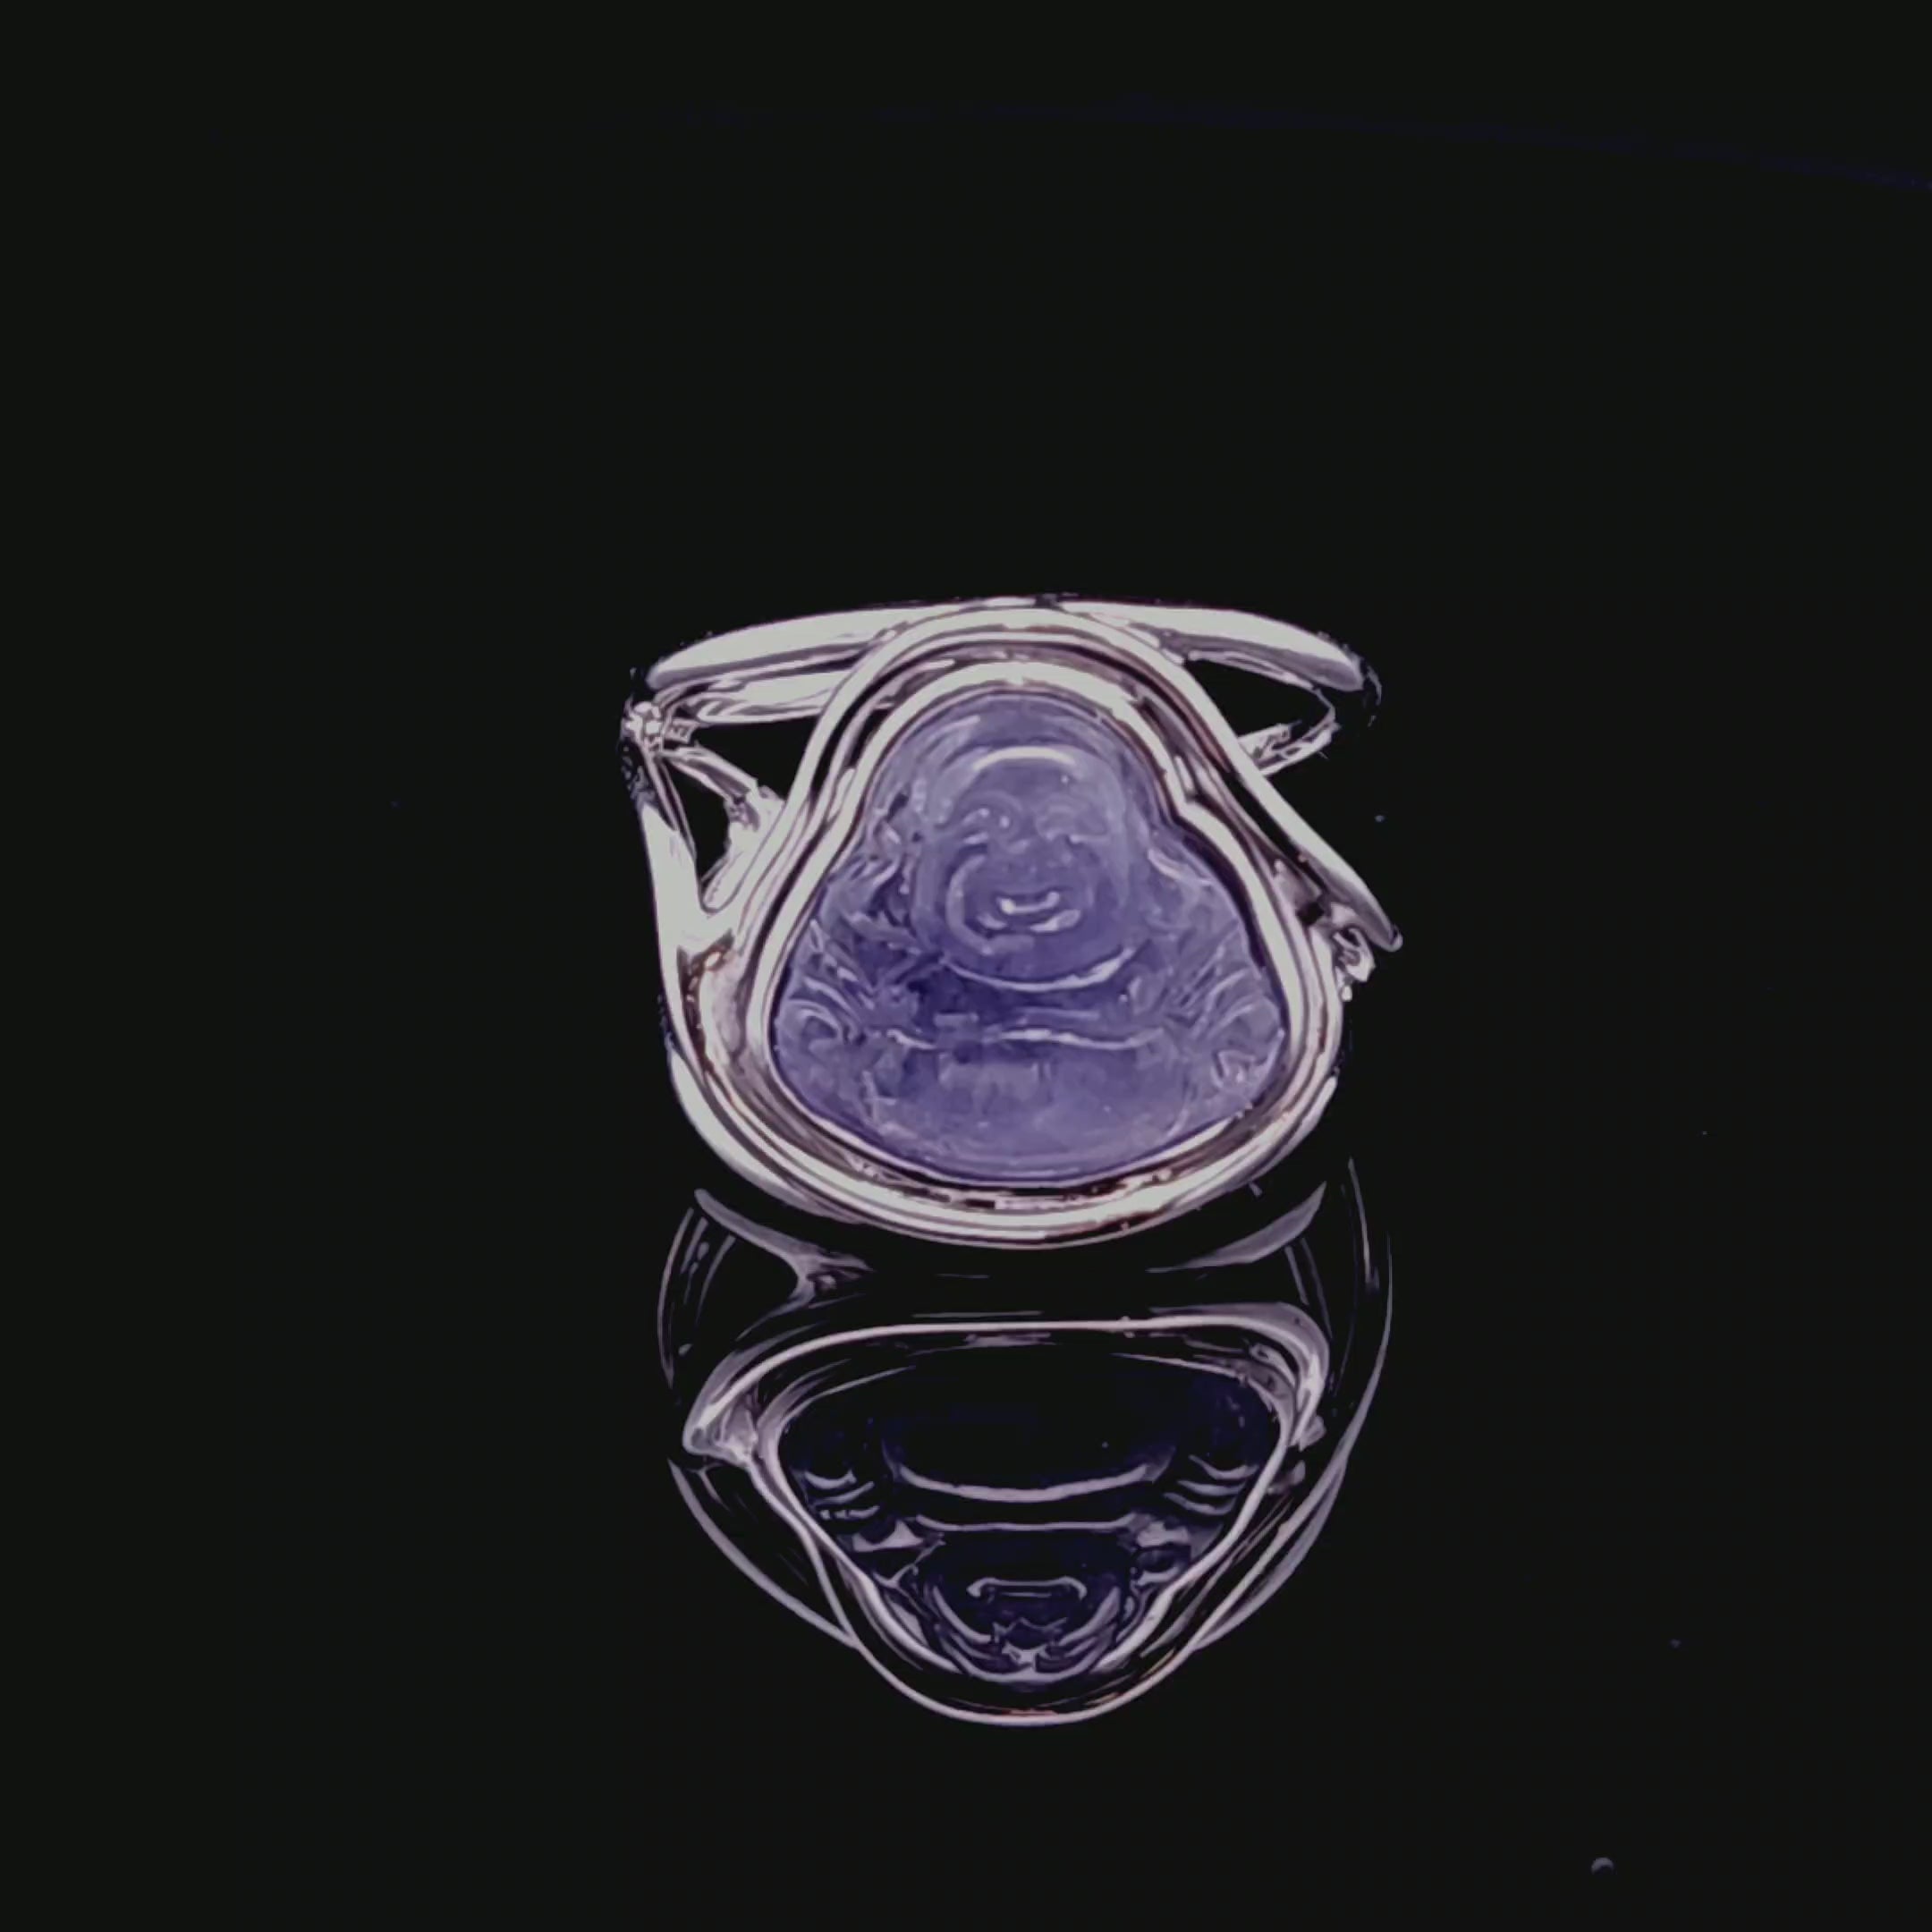 Tanzanite Buddha Adjustable Finger Cuff Ring .925 Silver (High Quality) for Higher Levels of Awareness and Divine Connection